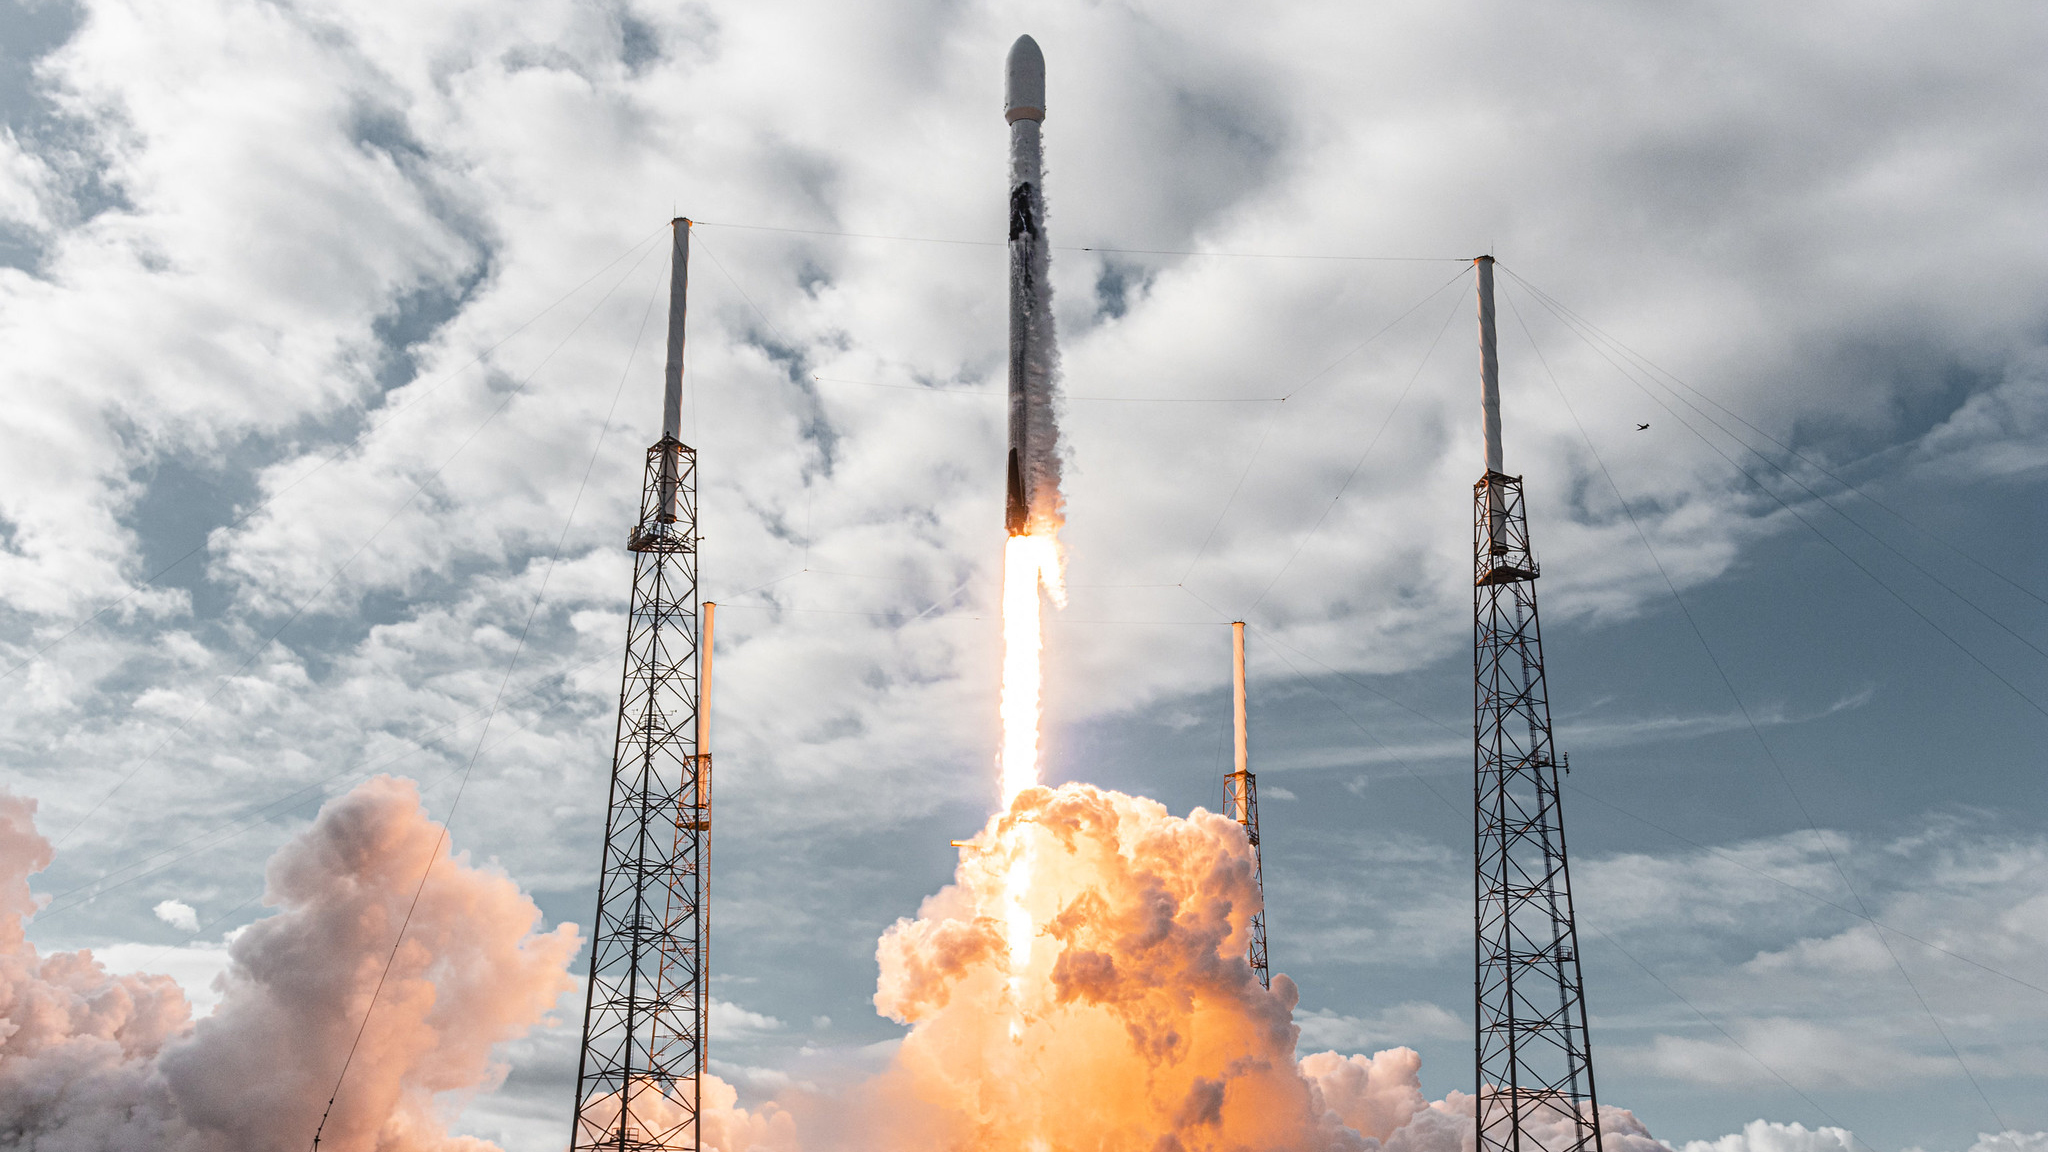 A SpaceX Falcon 9 rocket launches 143 small satellites into orbit from Cape Canaveral Space Force Station in Florida on Jan. 24, 2021 on the Transporter-1 rideshare mission.